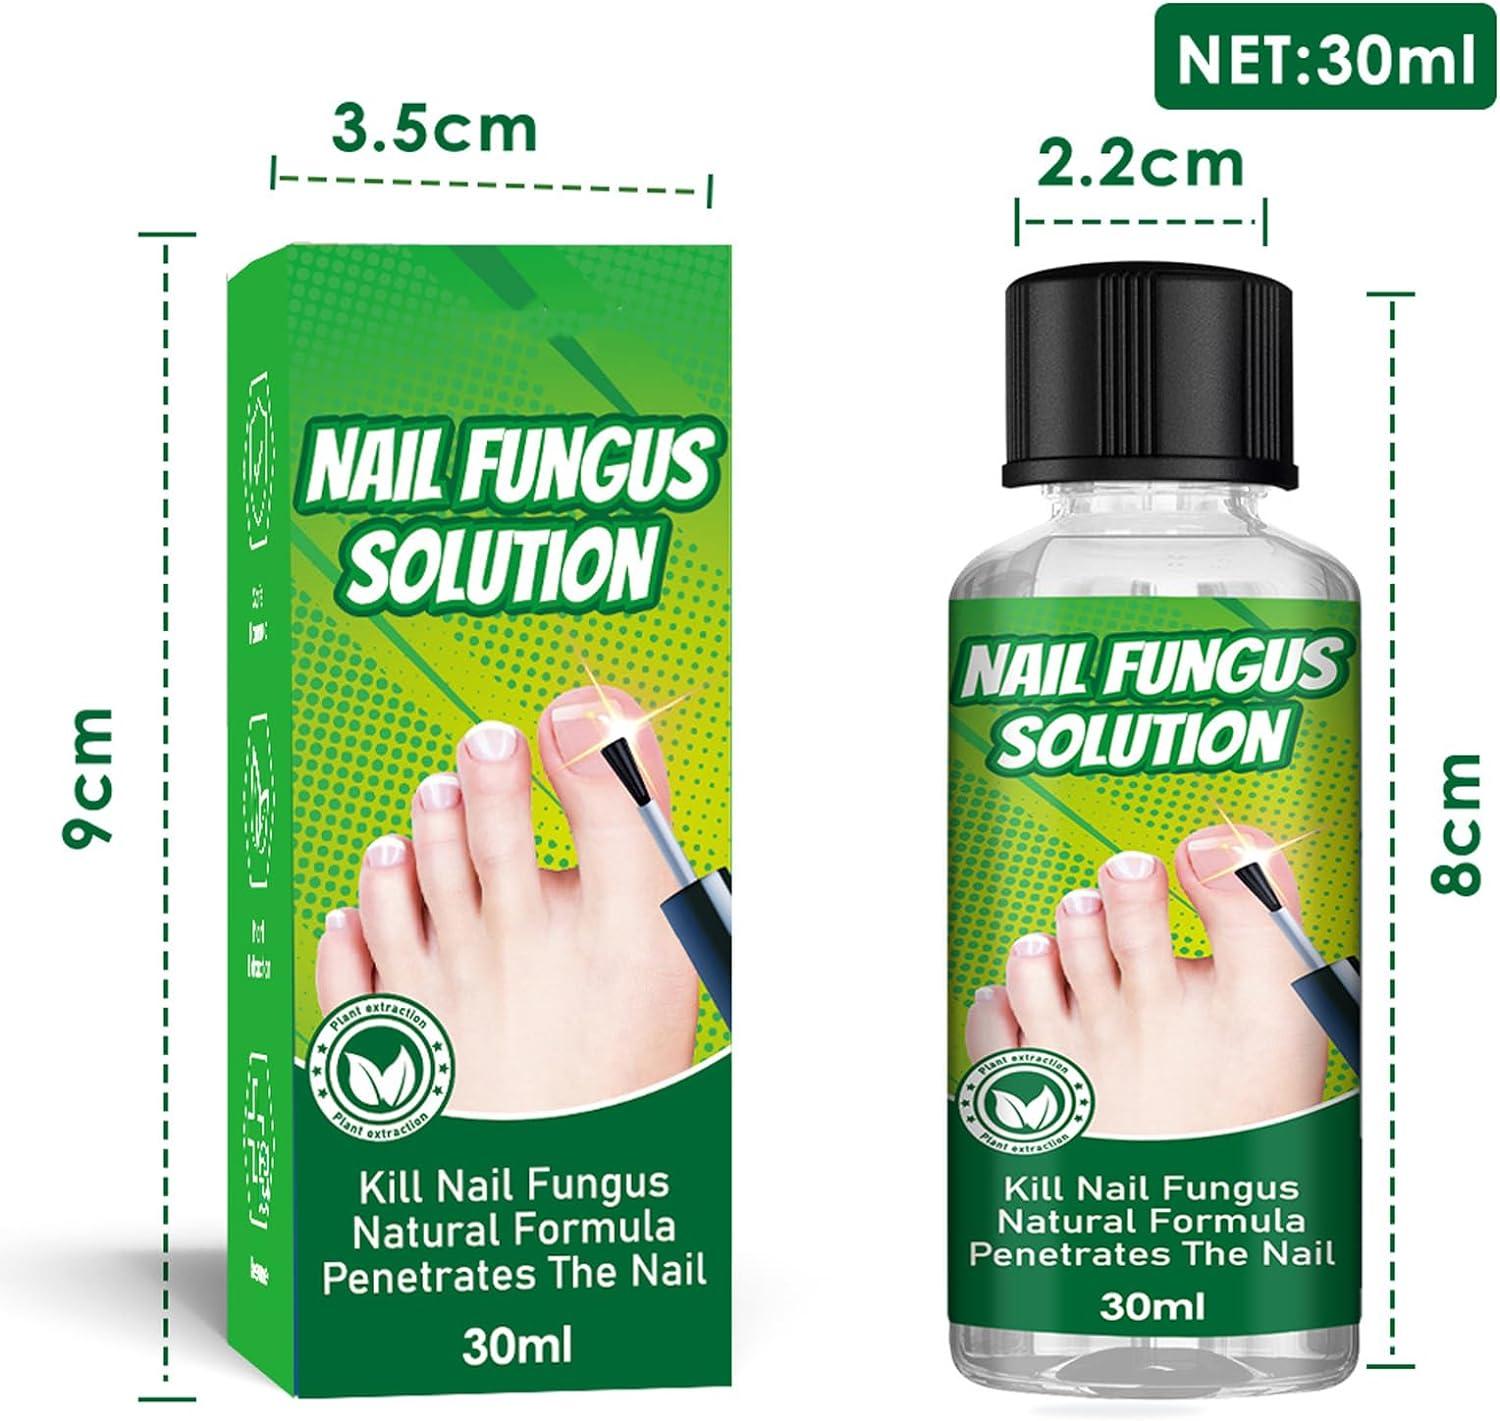 NHS 111 Wales - Health A-Z : Fungal nail infection